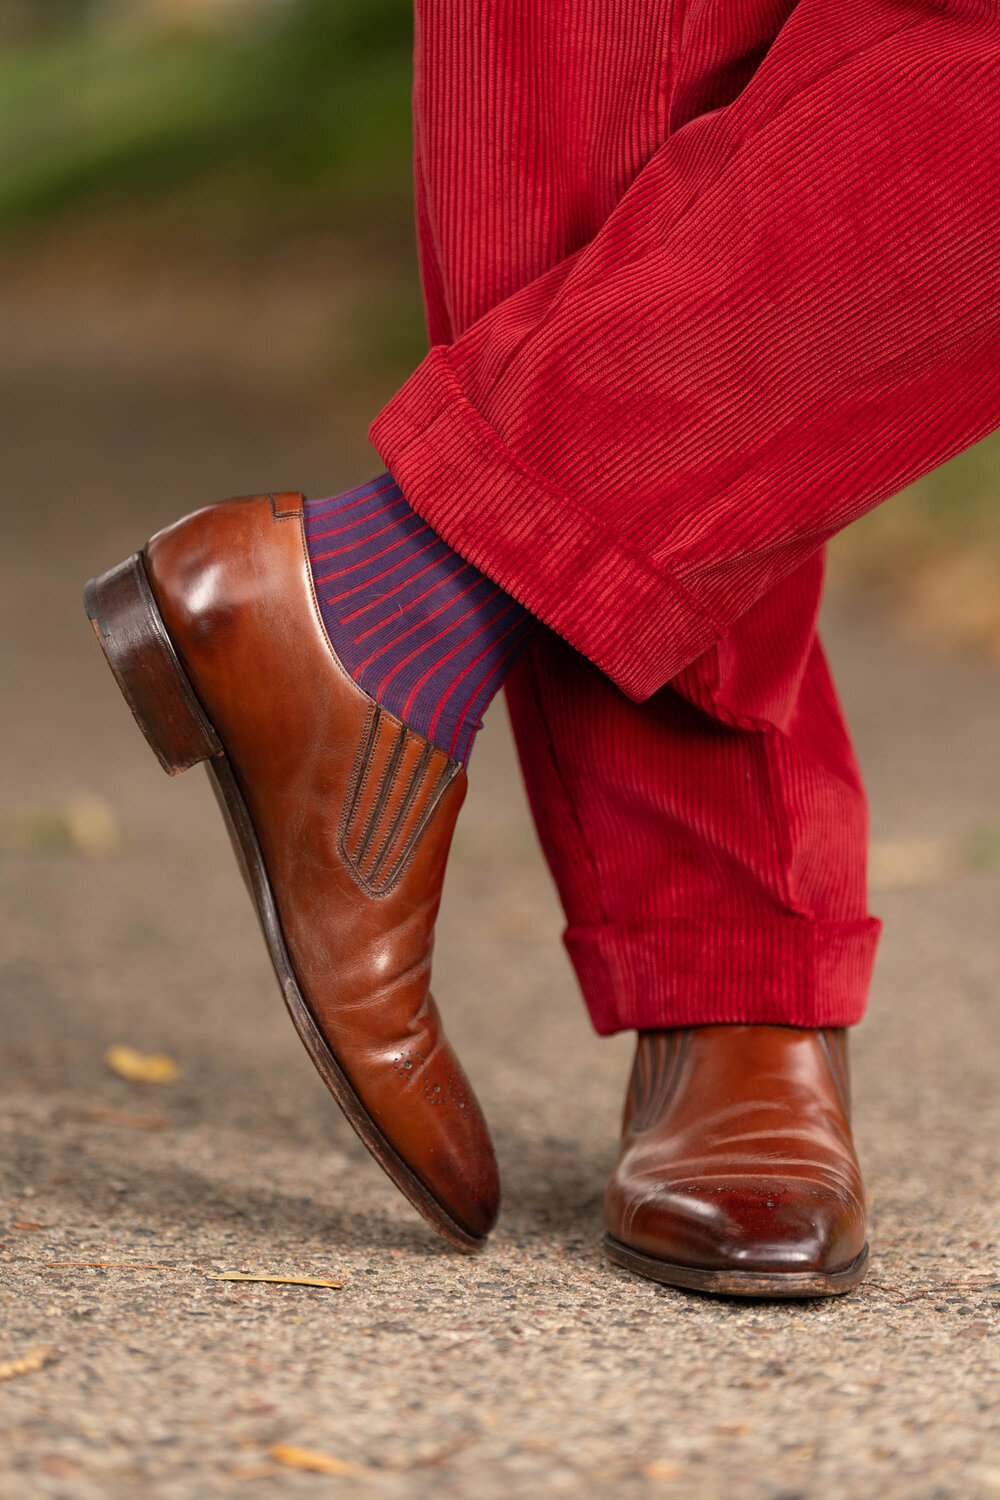 Red County Corduroy Pants